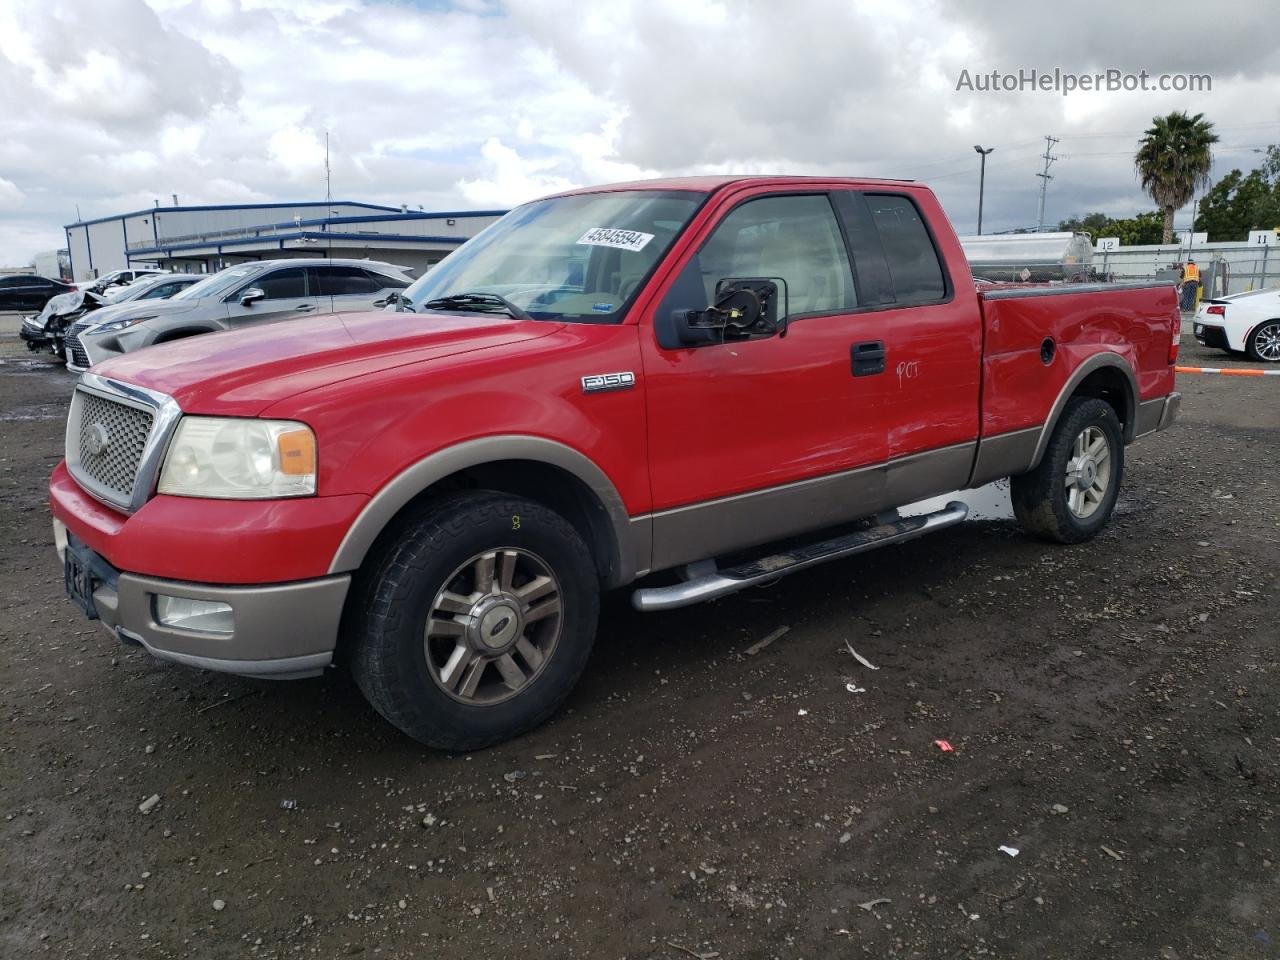 2004 Ford F150  Red vin: 1FTPX12574KD96284